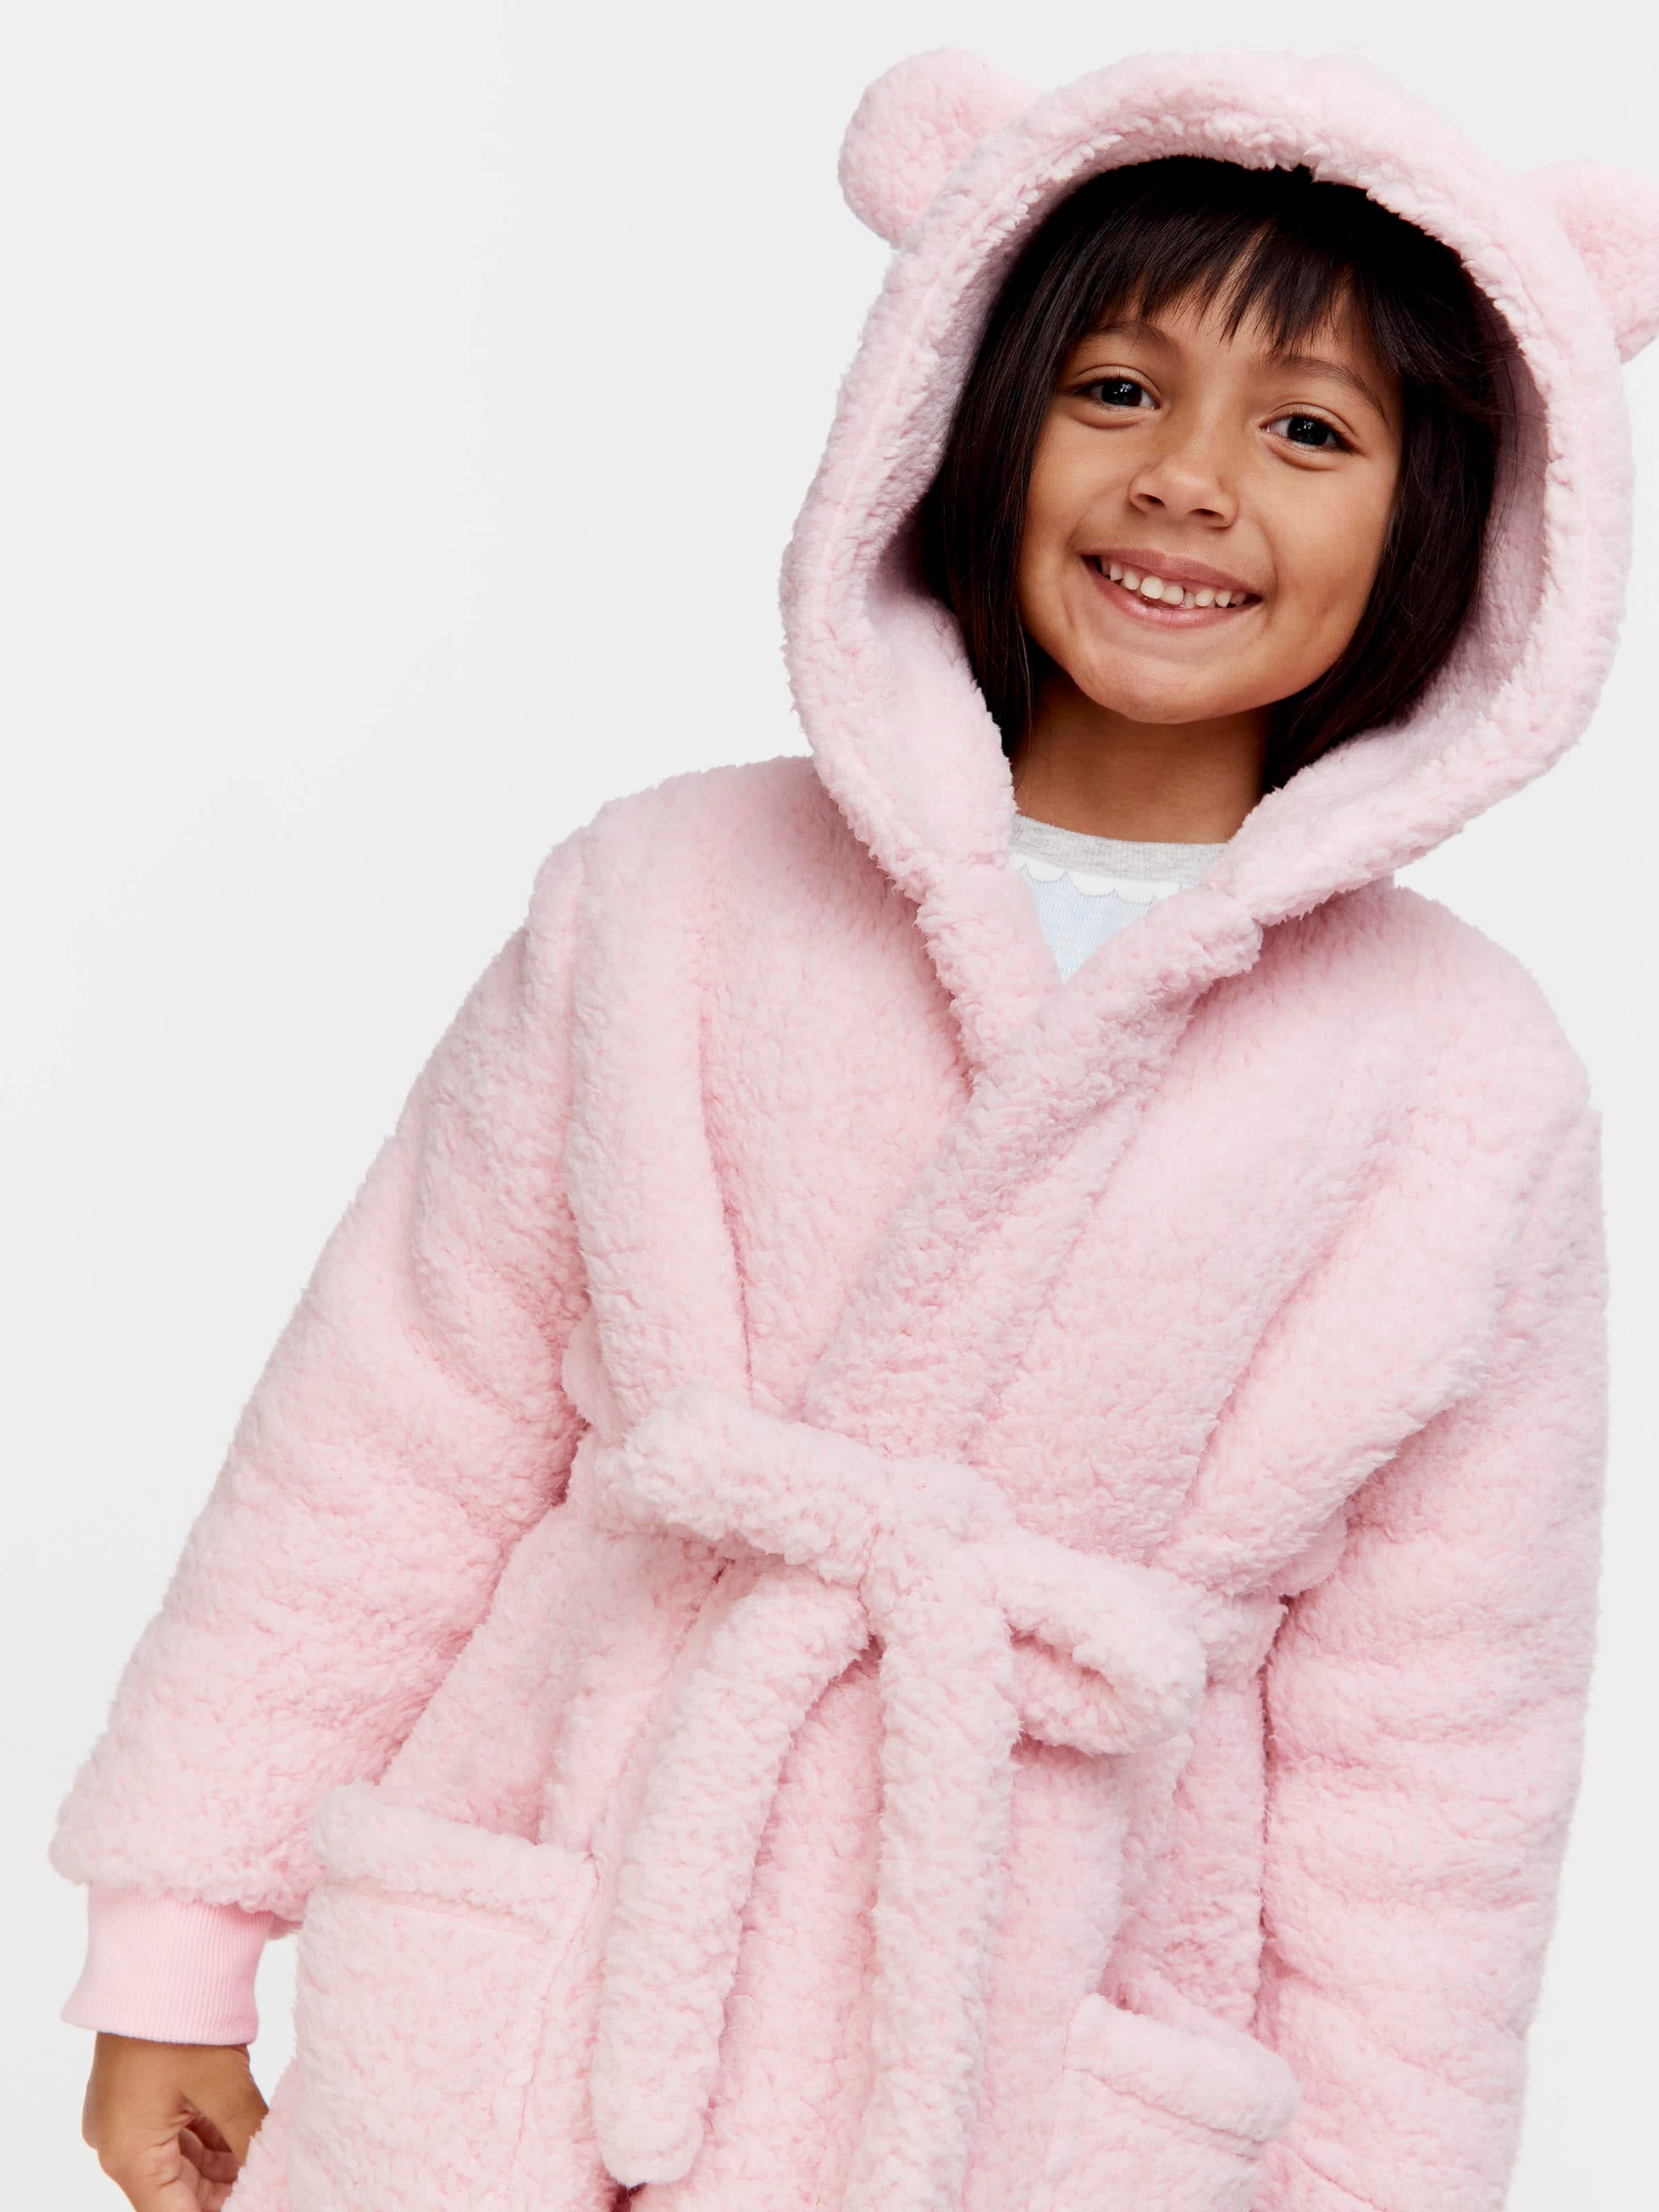 CityComfort Dressing Gown for Girls, Hooded Super Soft Kids Dressing Gowns  in Purple Pink, Fluffy Fleece Robe with Belt, Gifts for Girls Teenagers Age  5-14 (Pink, 5/6 Years) : Amazon.co.uk: Fashion